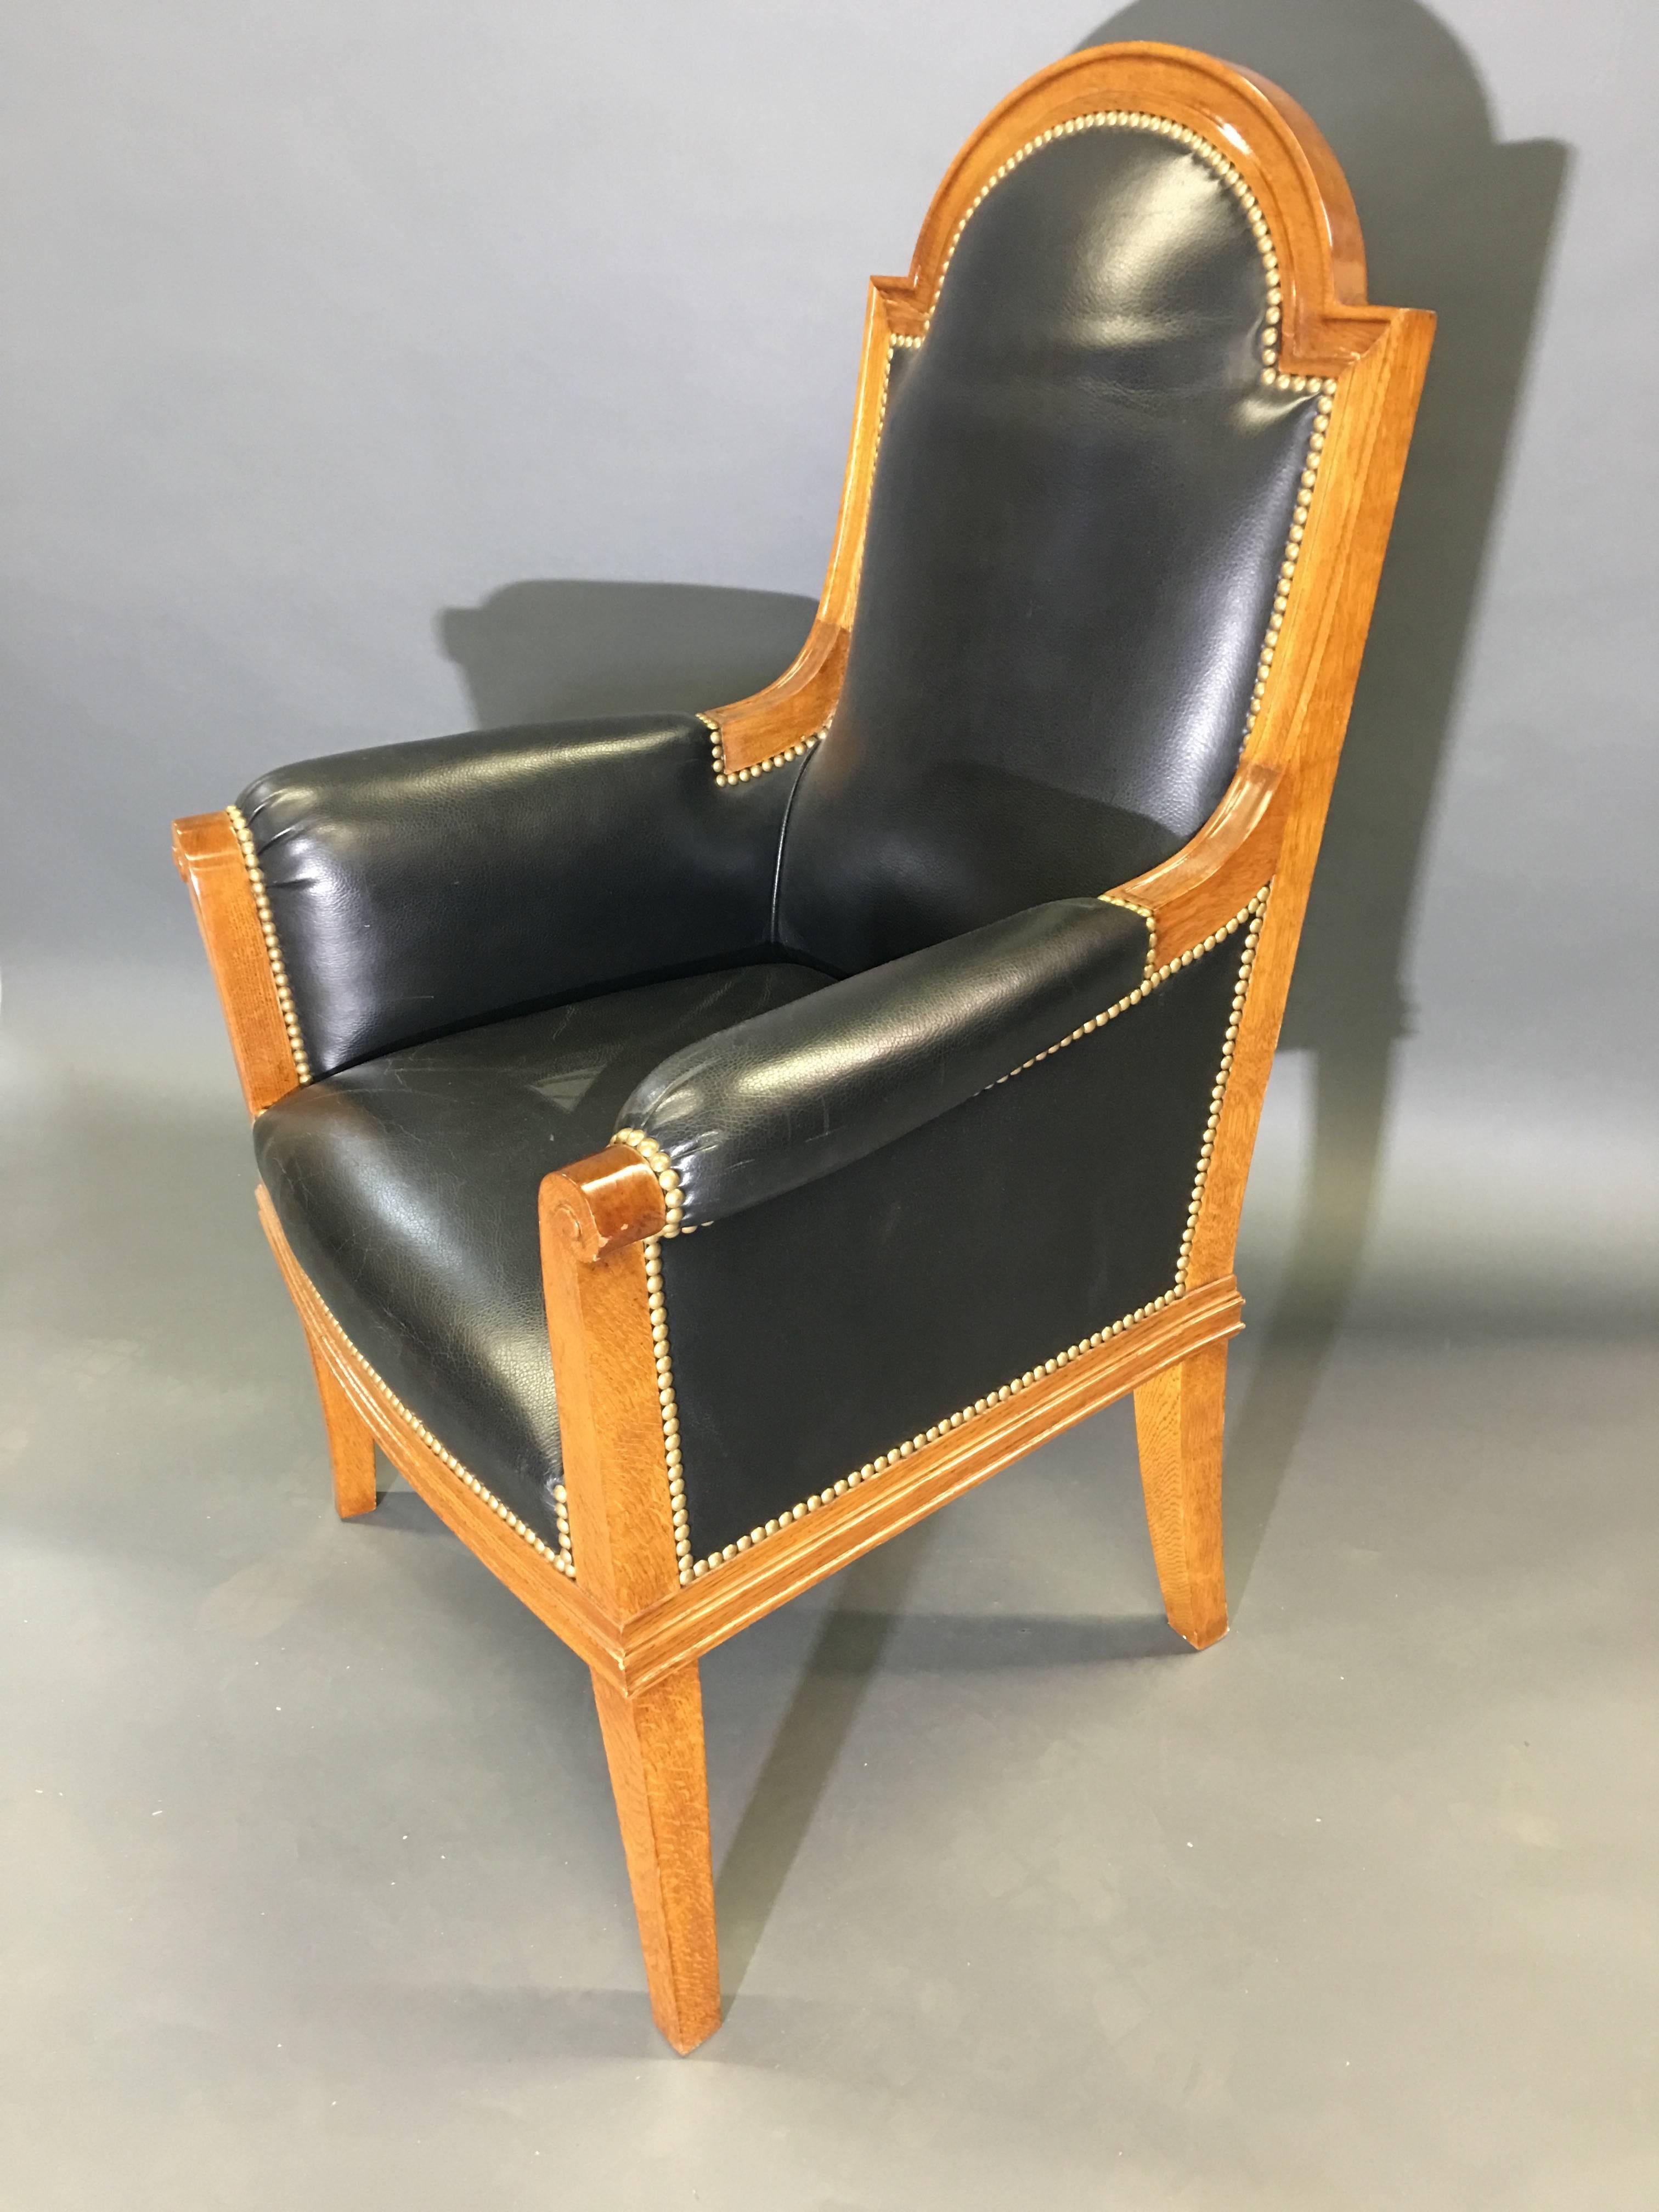 Solid oak upholstered in black leather, with an arched crest rail, upholstered rests and square supports headed with a scroll, atop four tapered and square legs.

OUR REFERENCE N5255